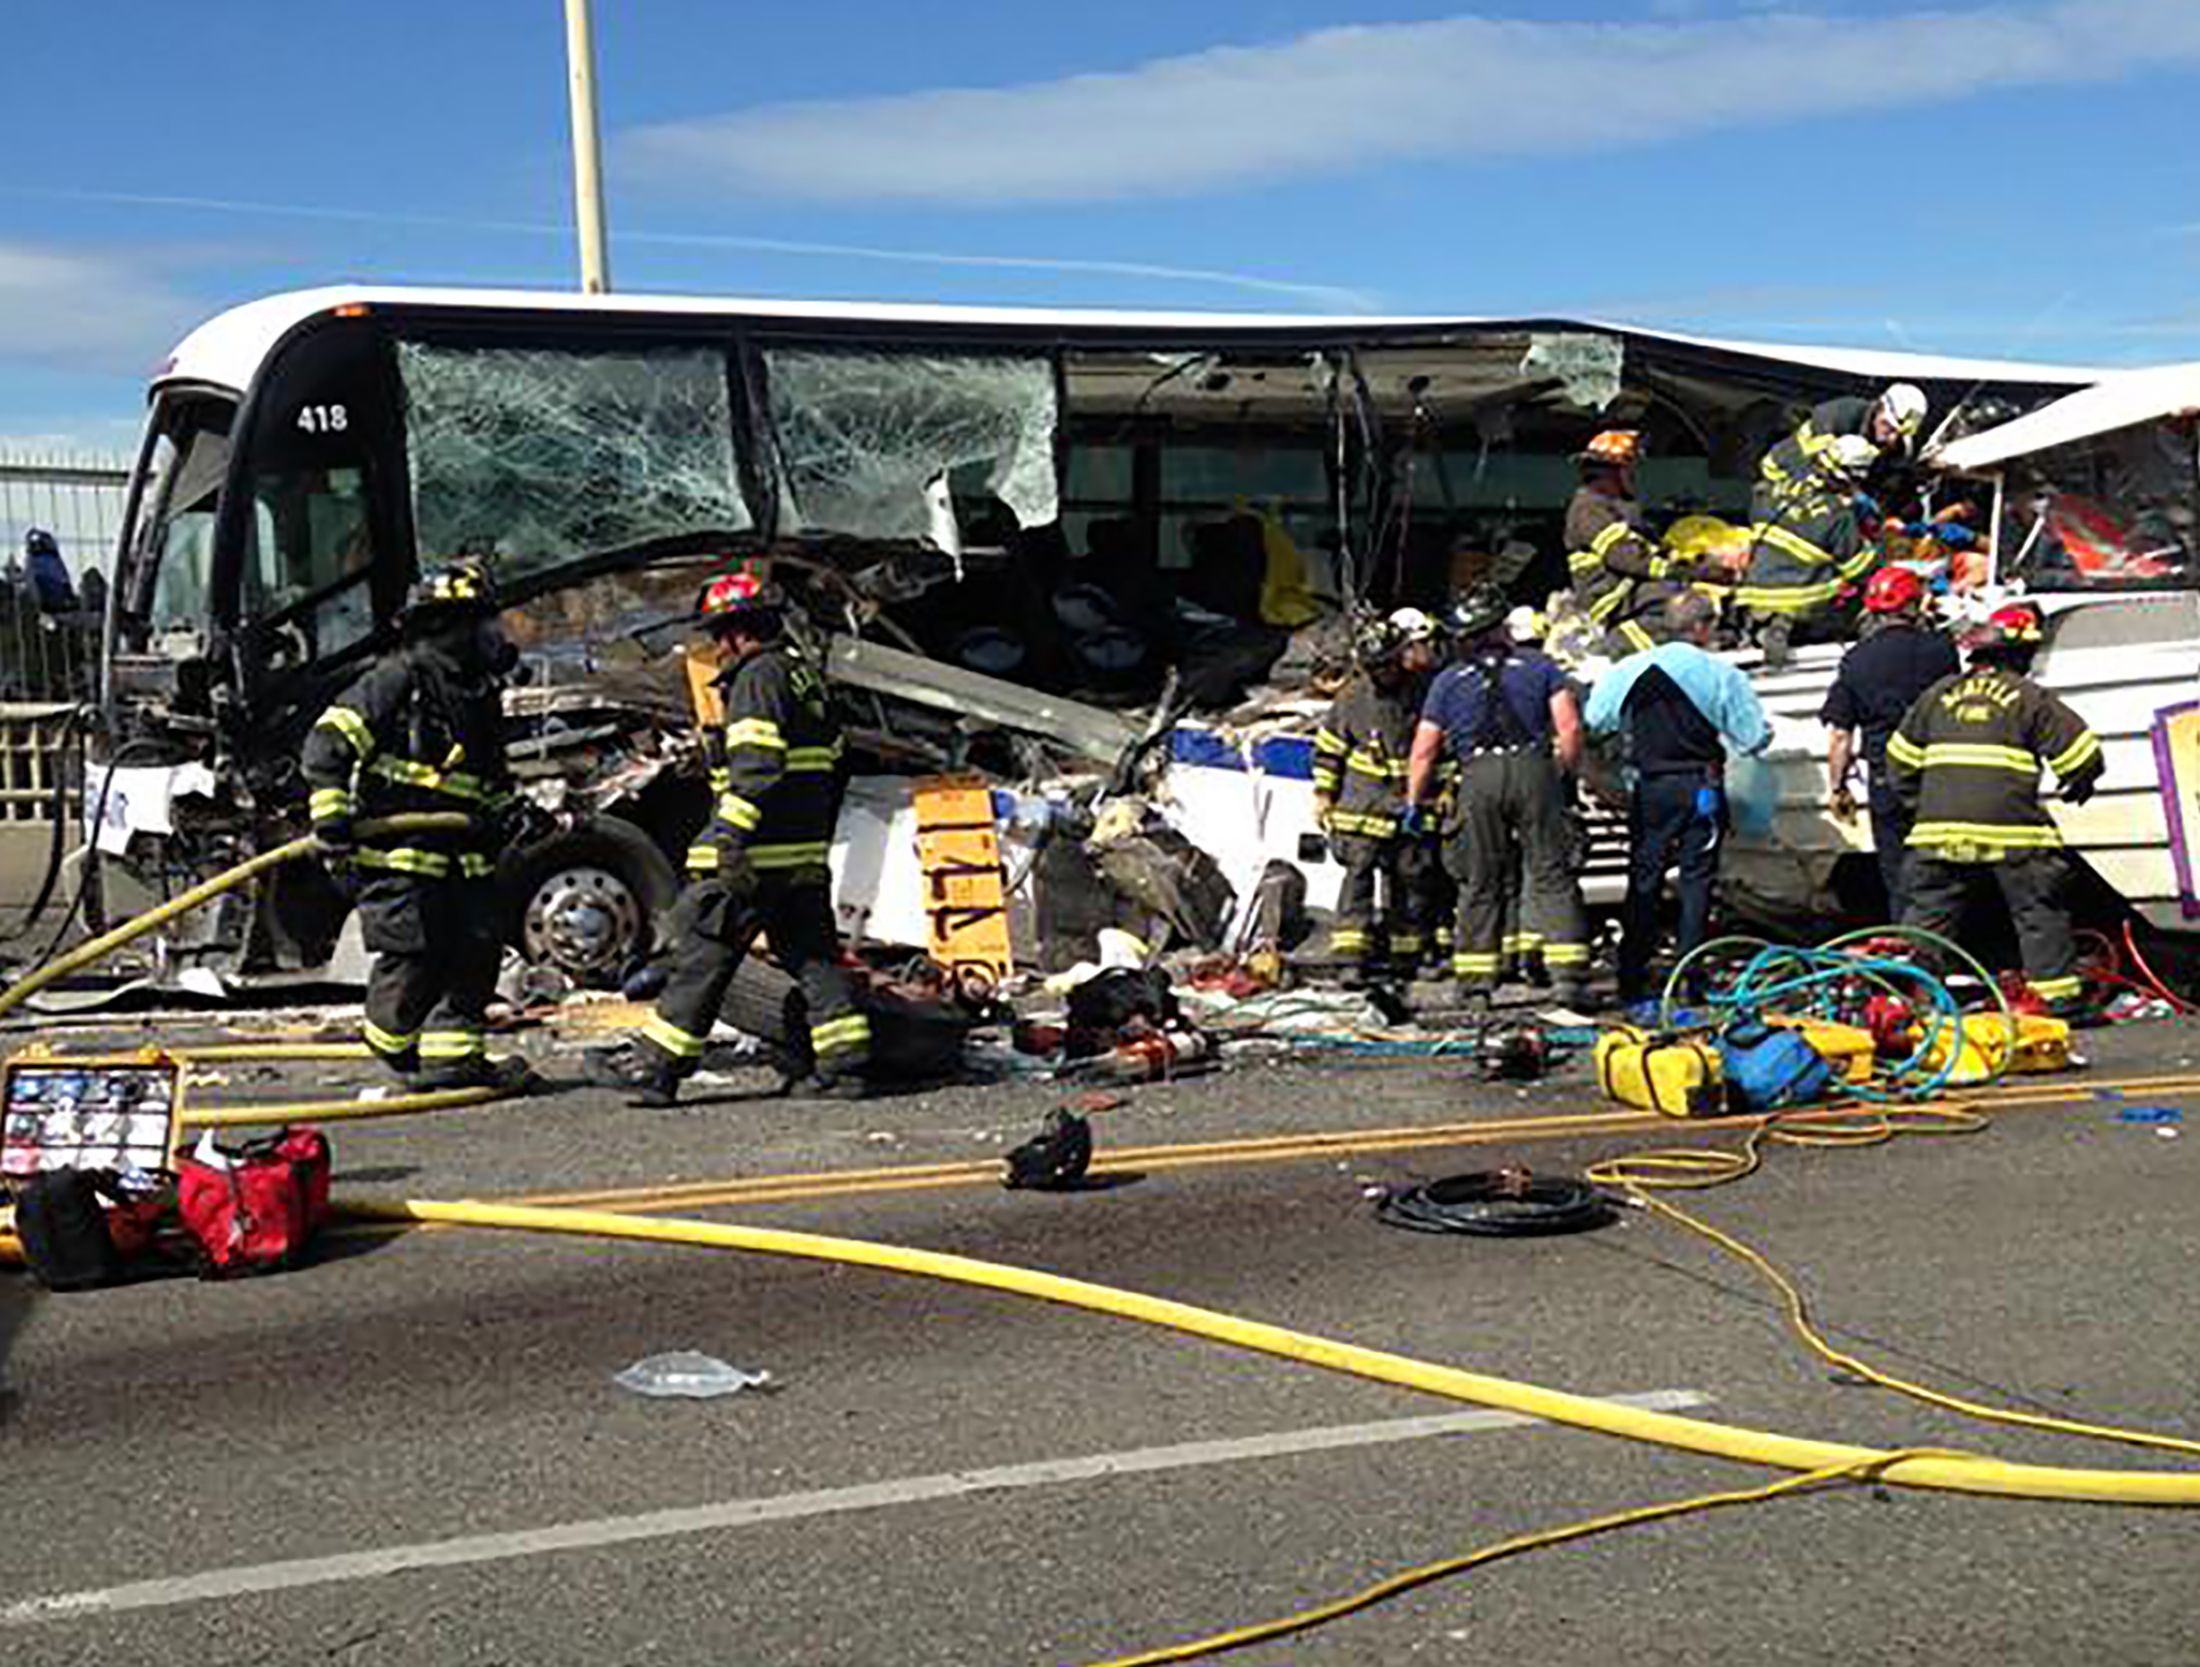 Firefighters assist victims after a crash between a bus and a tour vehicle ...